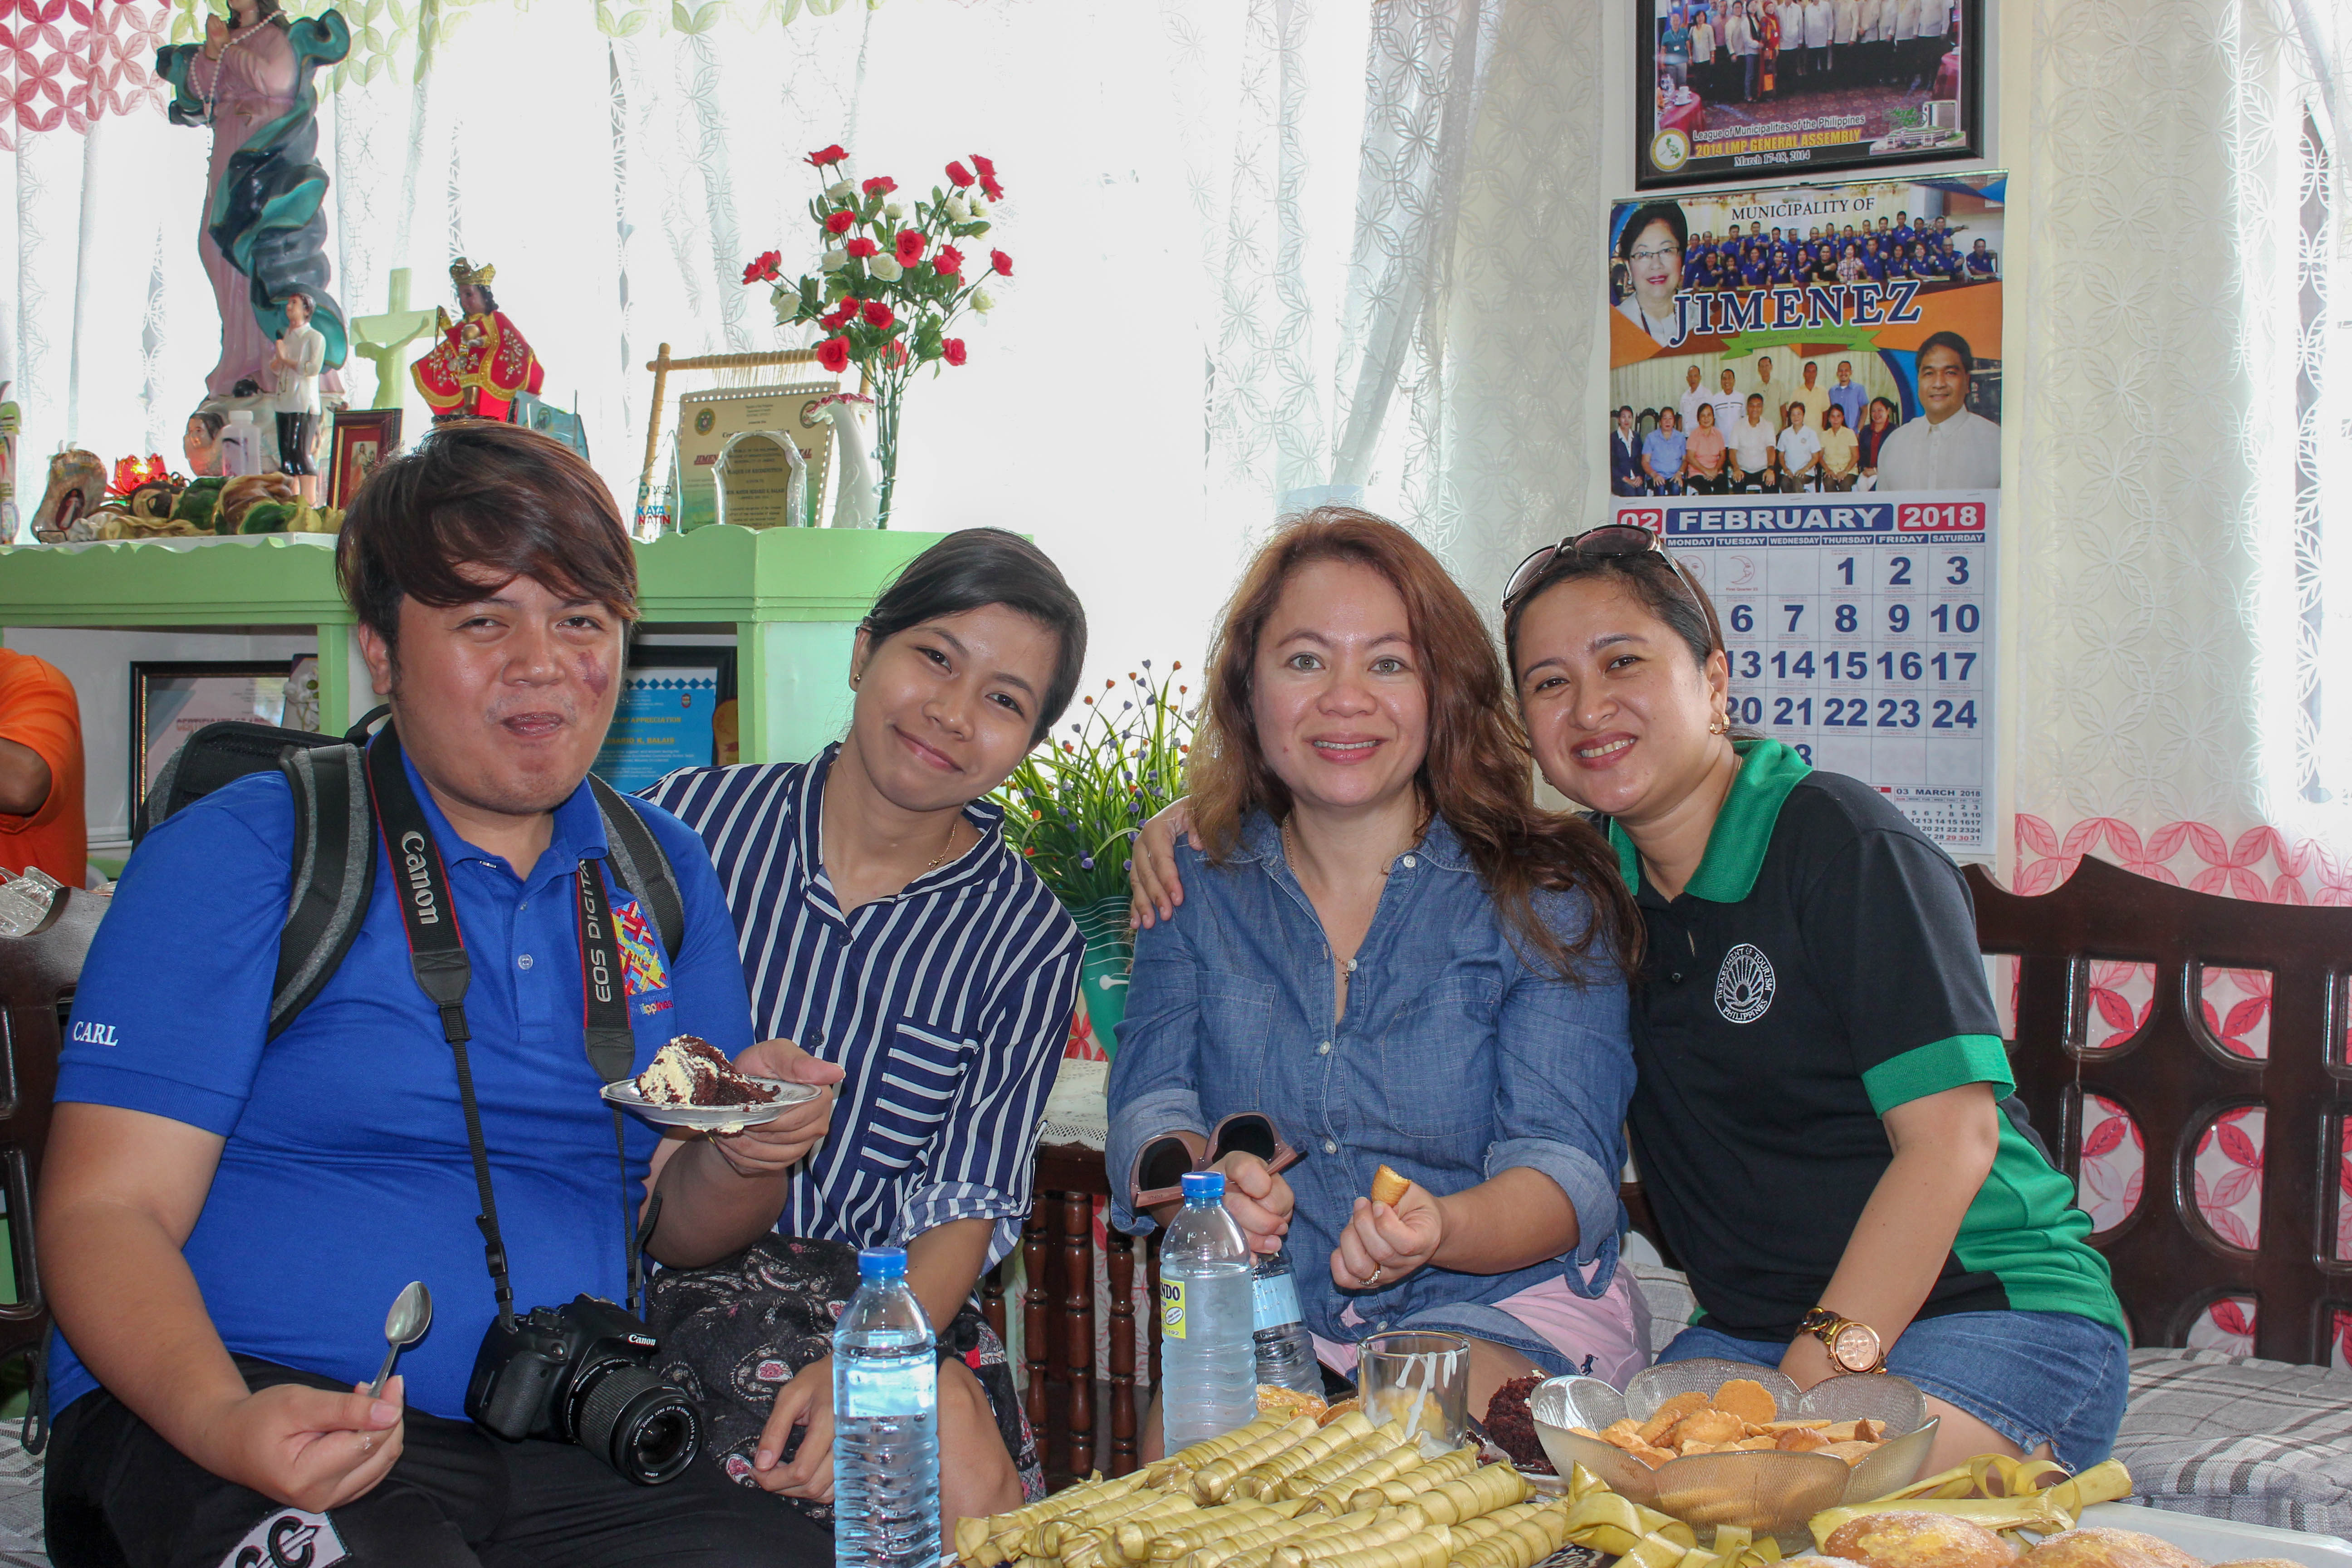 Quick stop for a snack at the Jimenez Municipal Hall